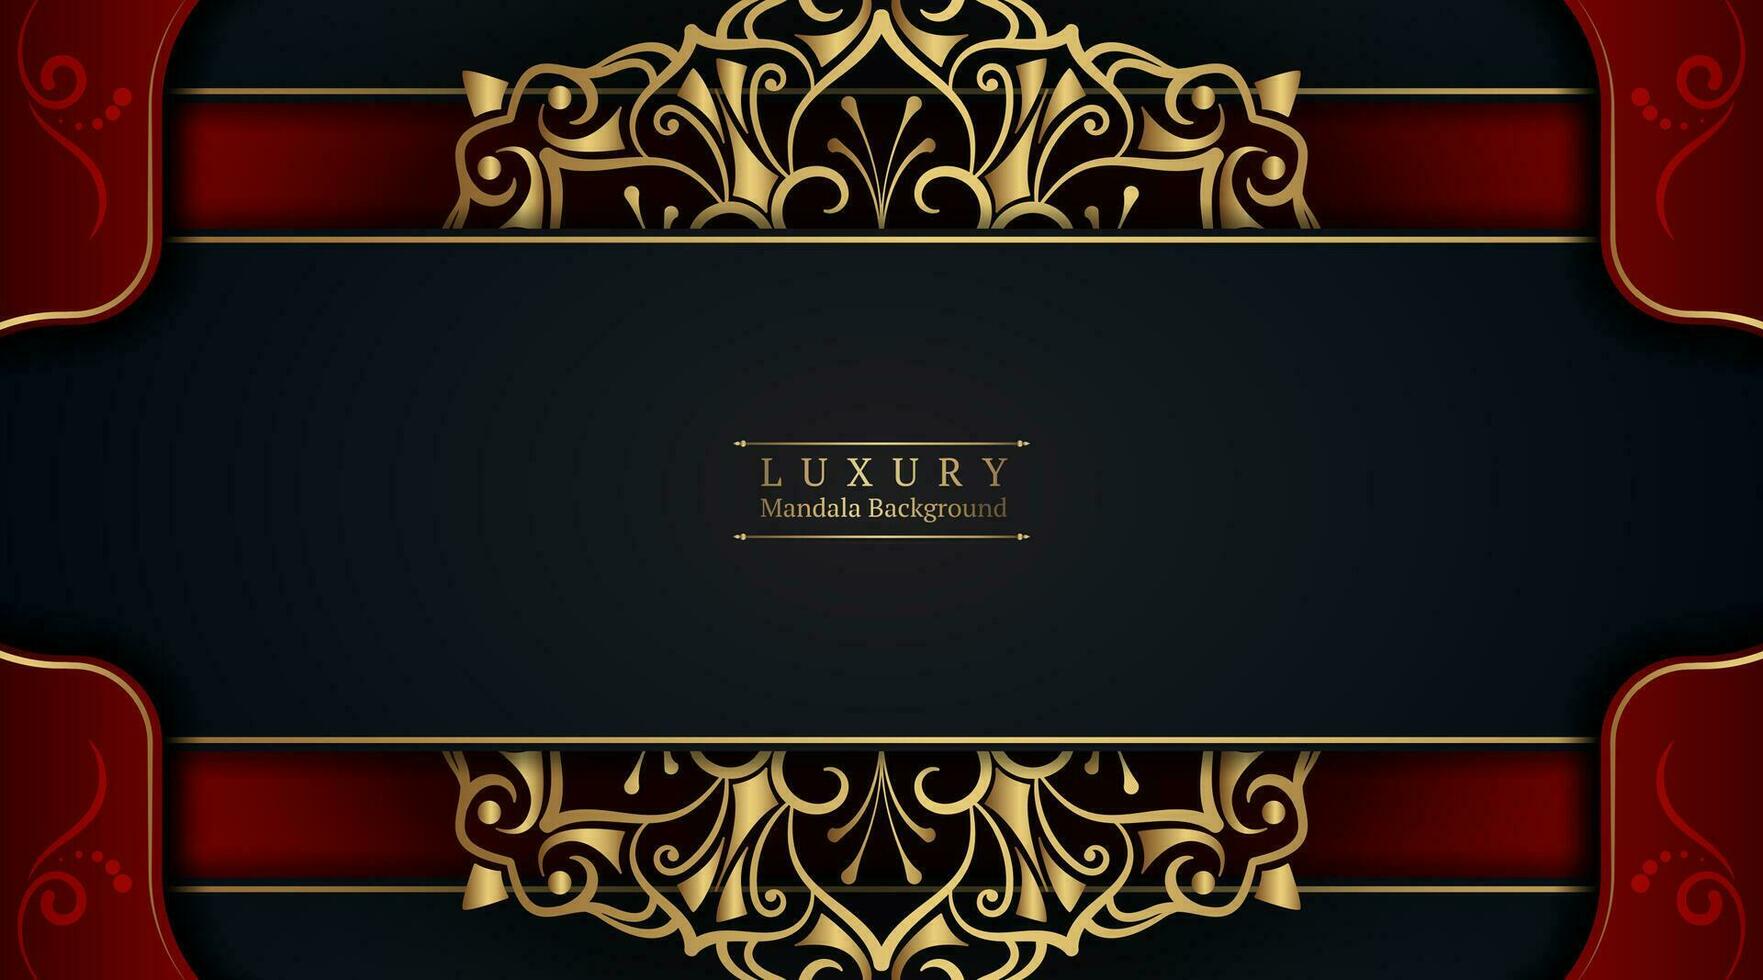 Luxury mandala background, red and black vector